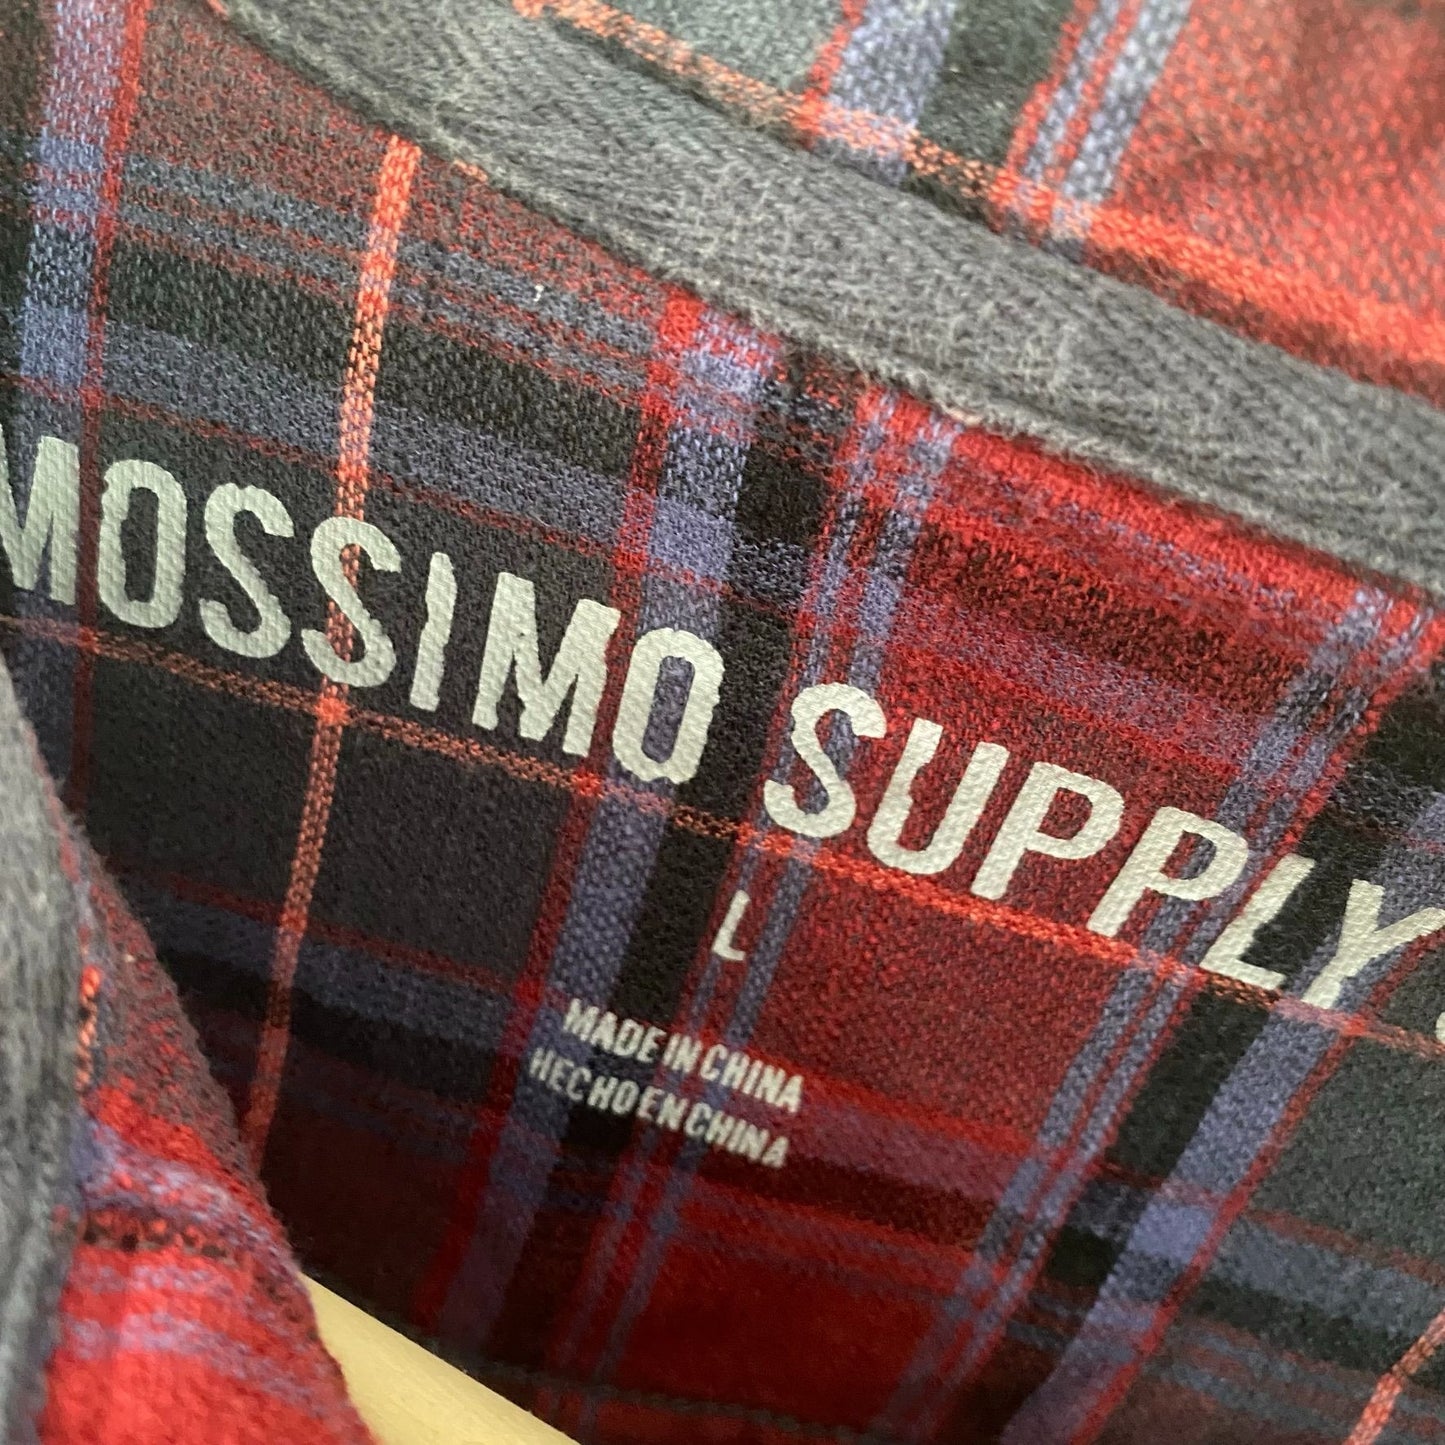 Mossimo Supply Red Plaid Flannel Shirt